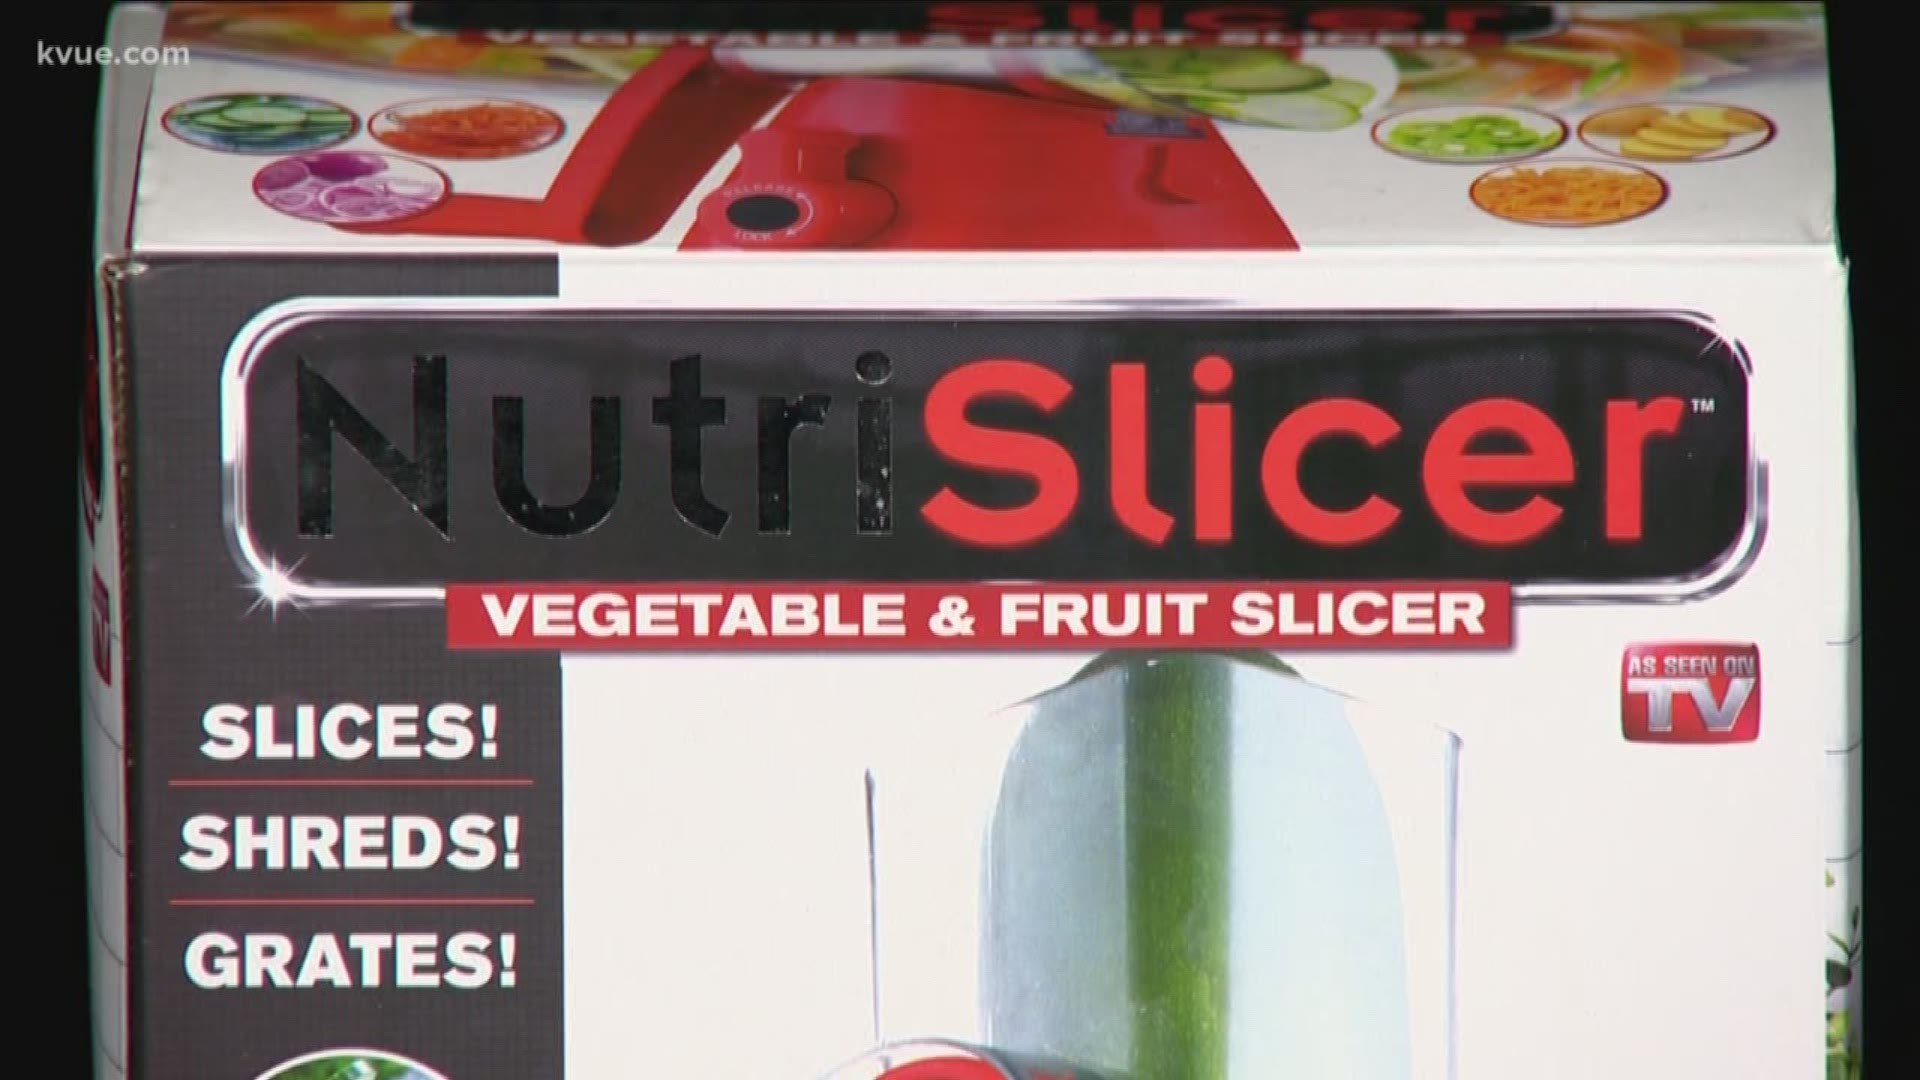 The Nutrisclicer says it will shave time off your meal prep. But does it work?